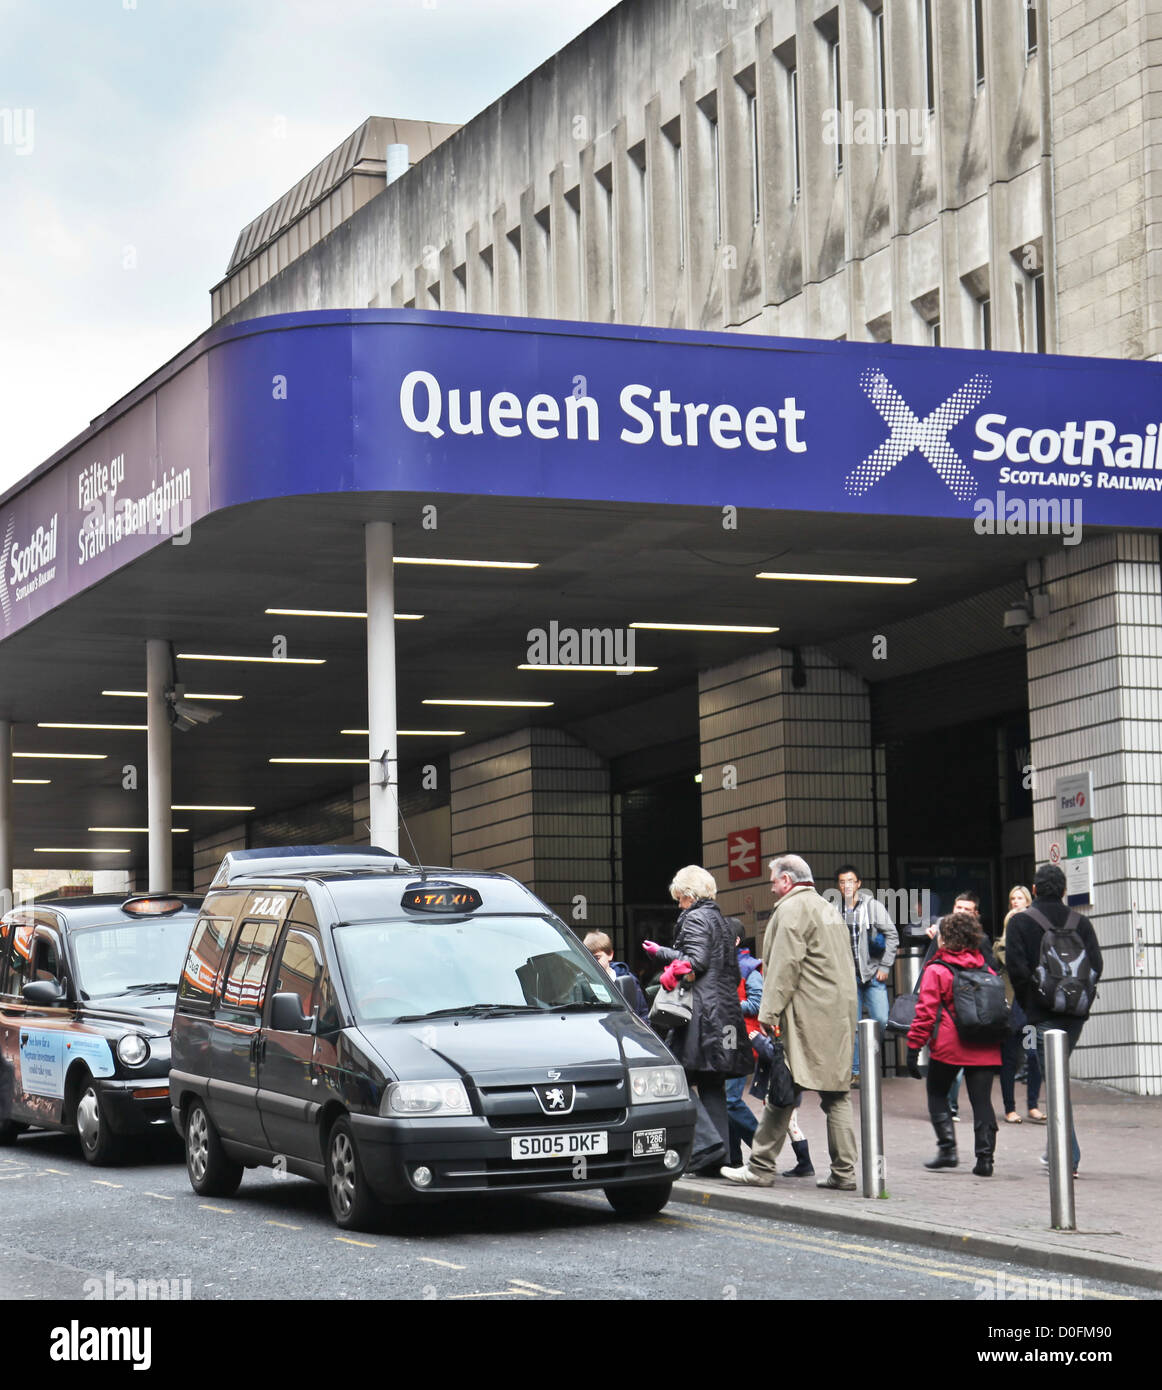 Passengers going into Queen Street Station, Glasgow, and arriving family going into a taxi, Dundas Street. Entrance canopy sign Stock Photo